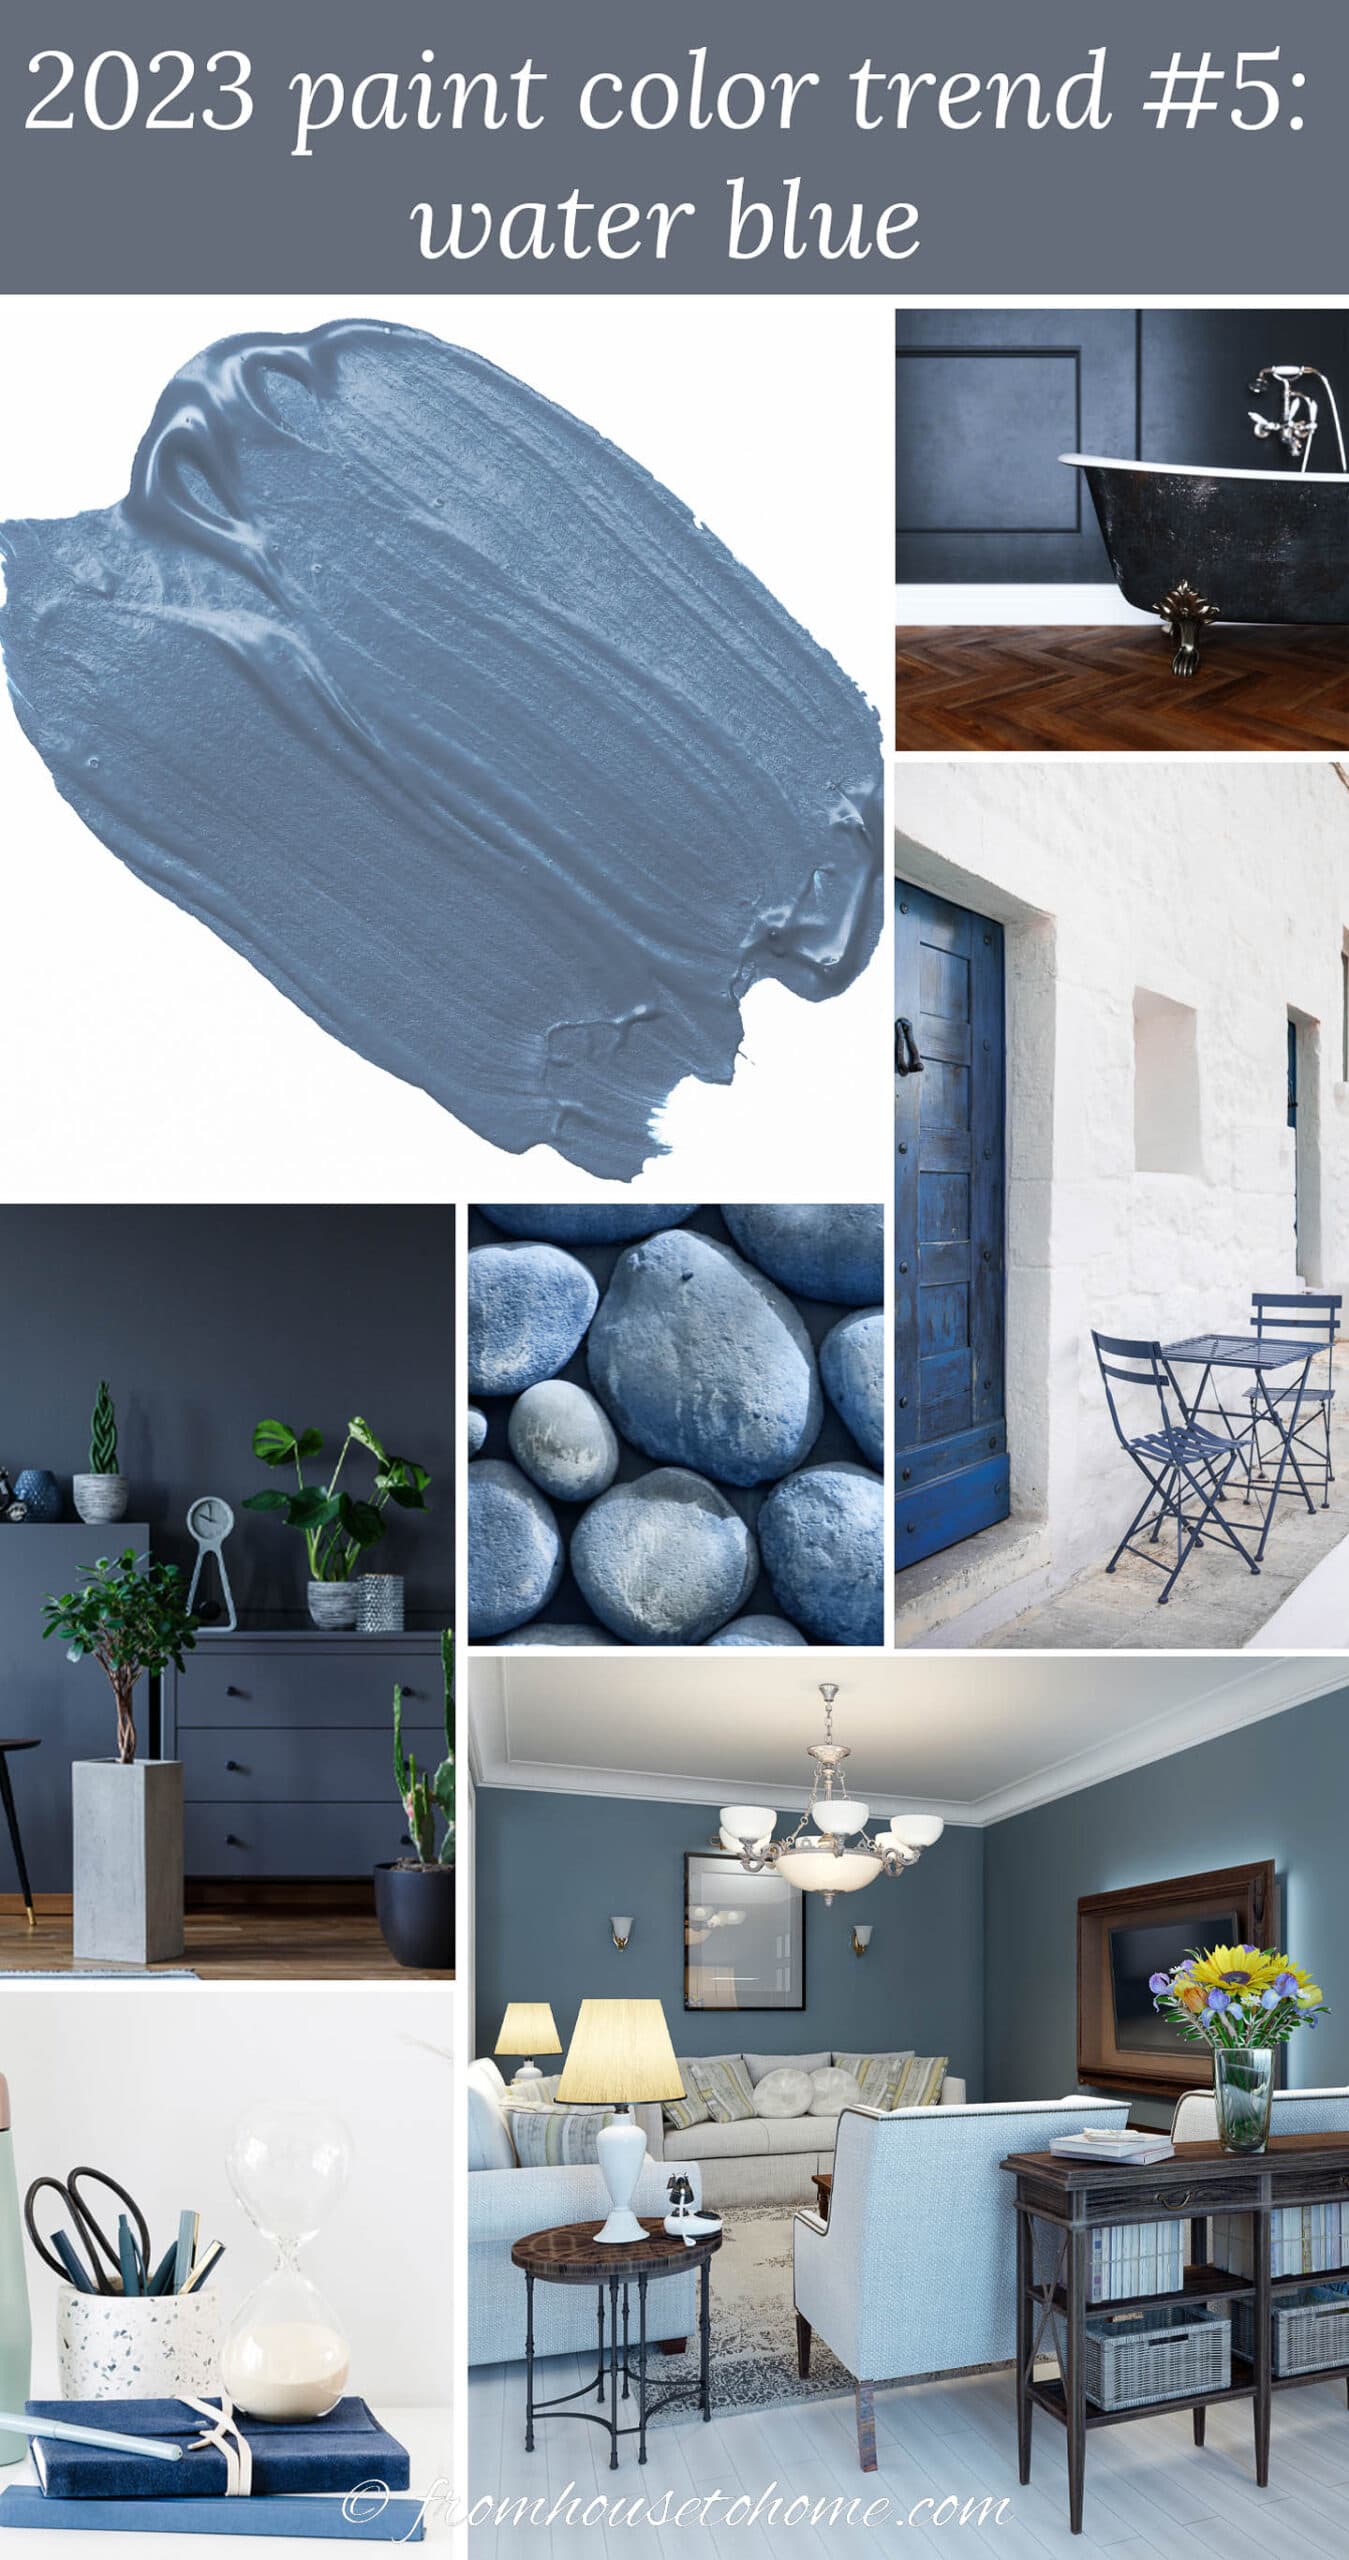 A collage of images using the 2023 paint color trend - water blue